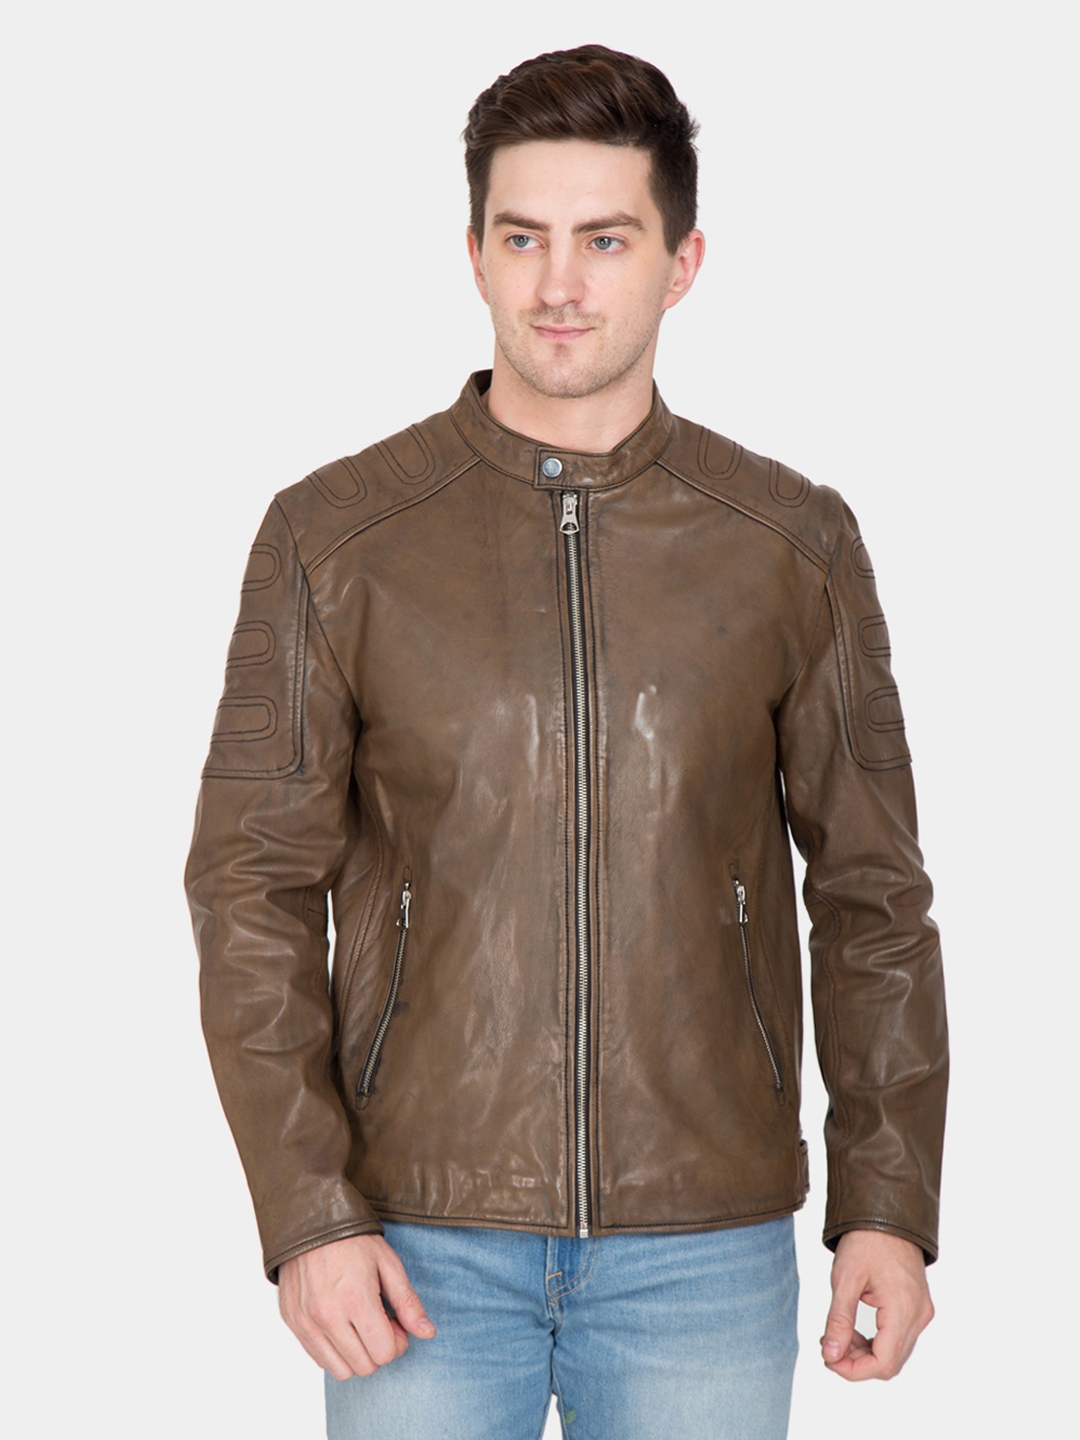 Justanned | JUSTANNED CAROB TAN LEATHER JACKET